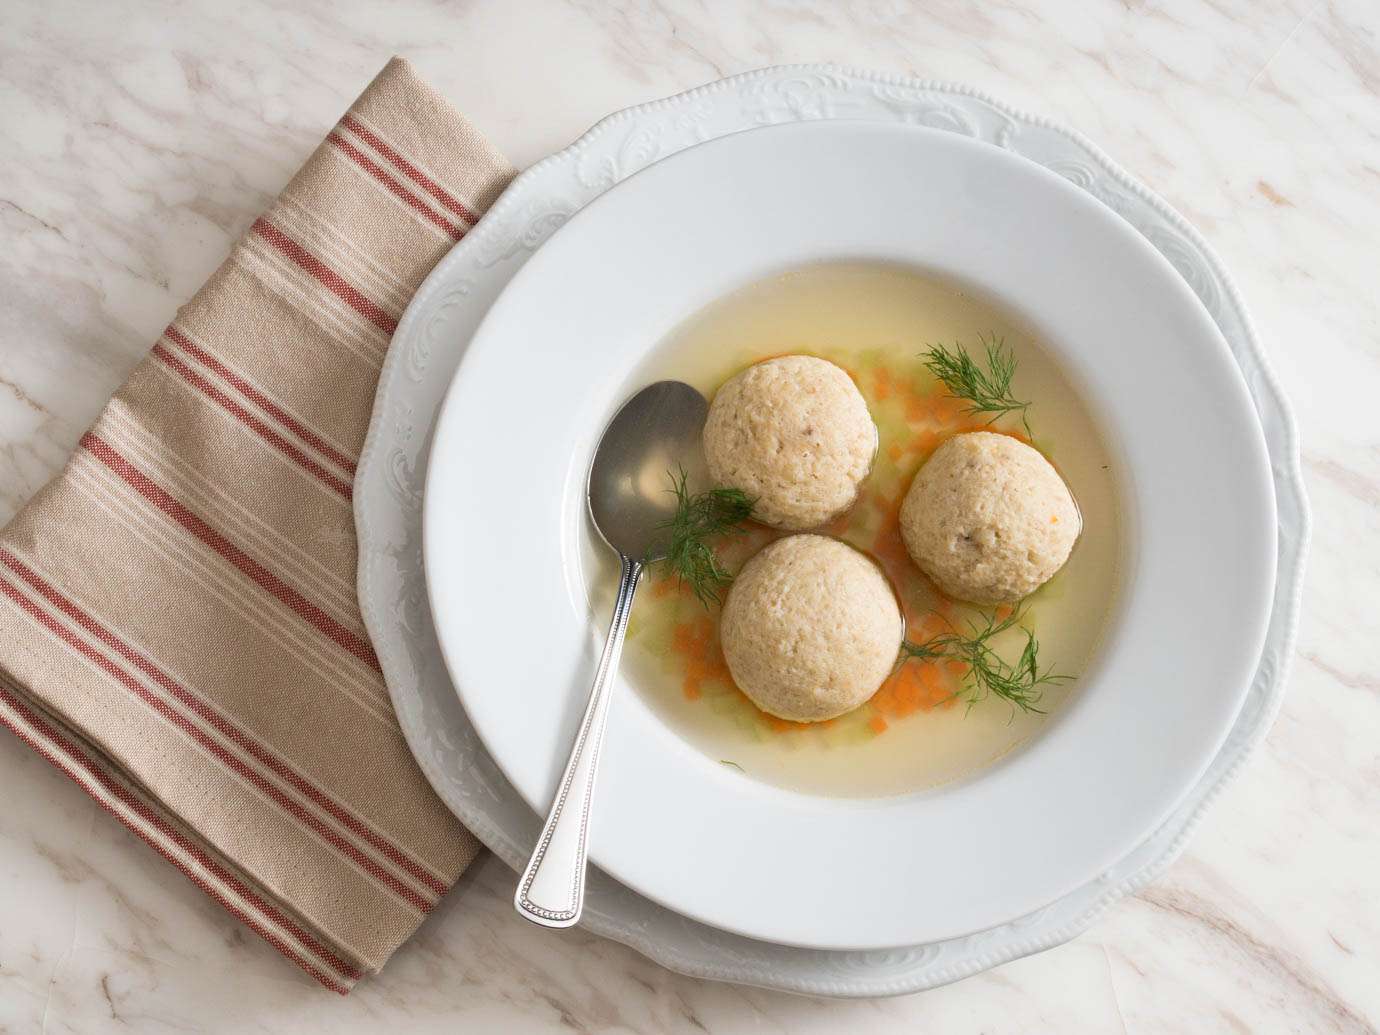 An overhead shot of a broad-rimmed white soup bowl containing three matzo balls in a light broth. Finely diced carrot and celery have sunk between the balls, and several dill fronds are floating on the surface.